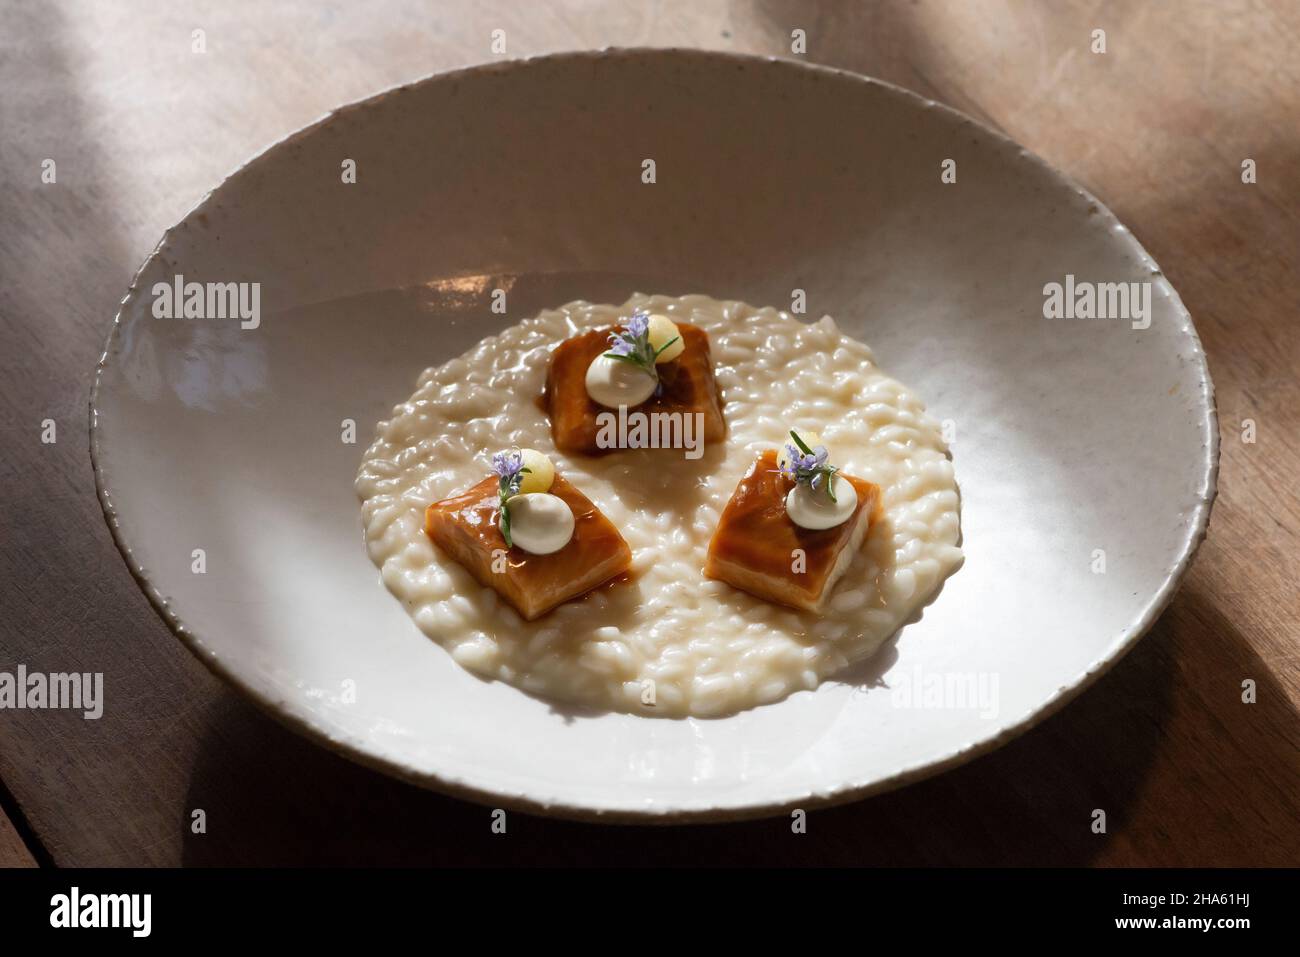 italy,trentino-south tyrol,alto adige,south tyrol,meran,district community burggrafenamt,algund,inn zur blauen traube,risotto from south tyrolean golden delicious apple with flamed smoked eel Stock Photo